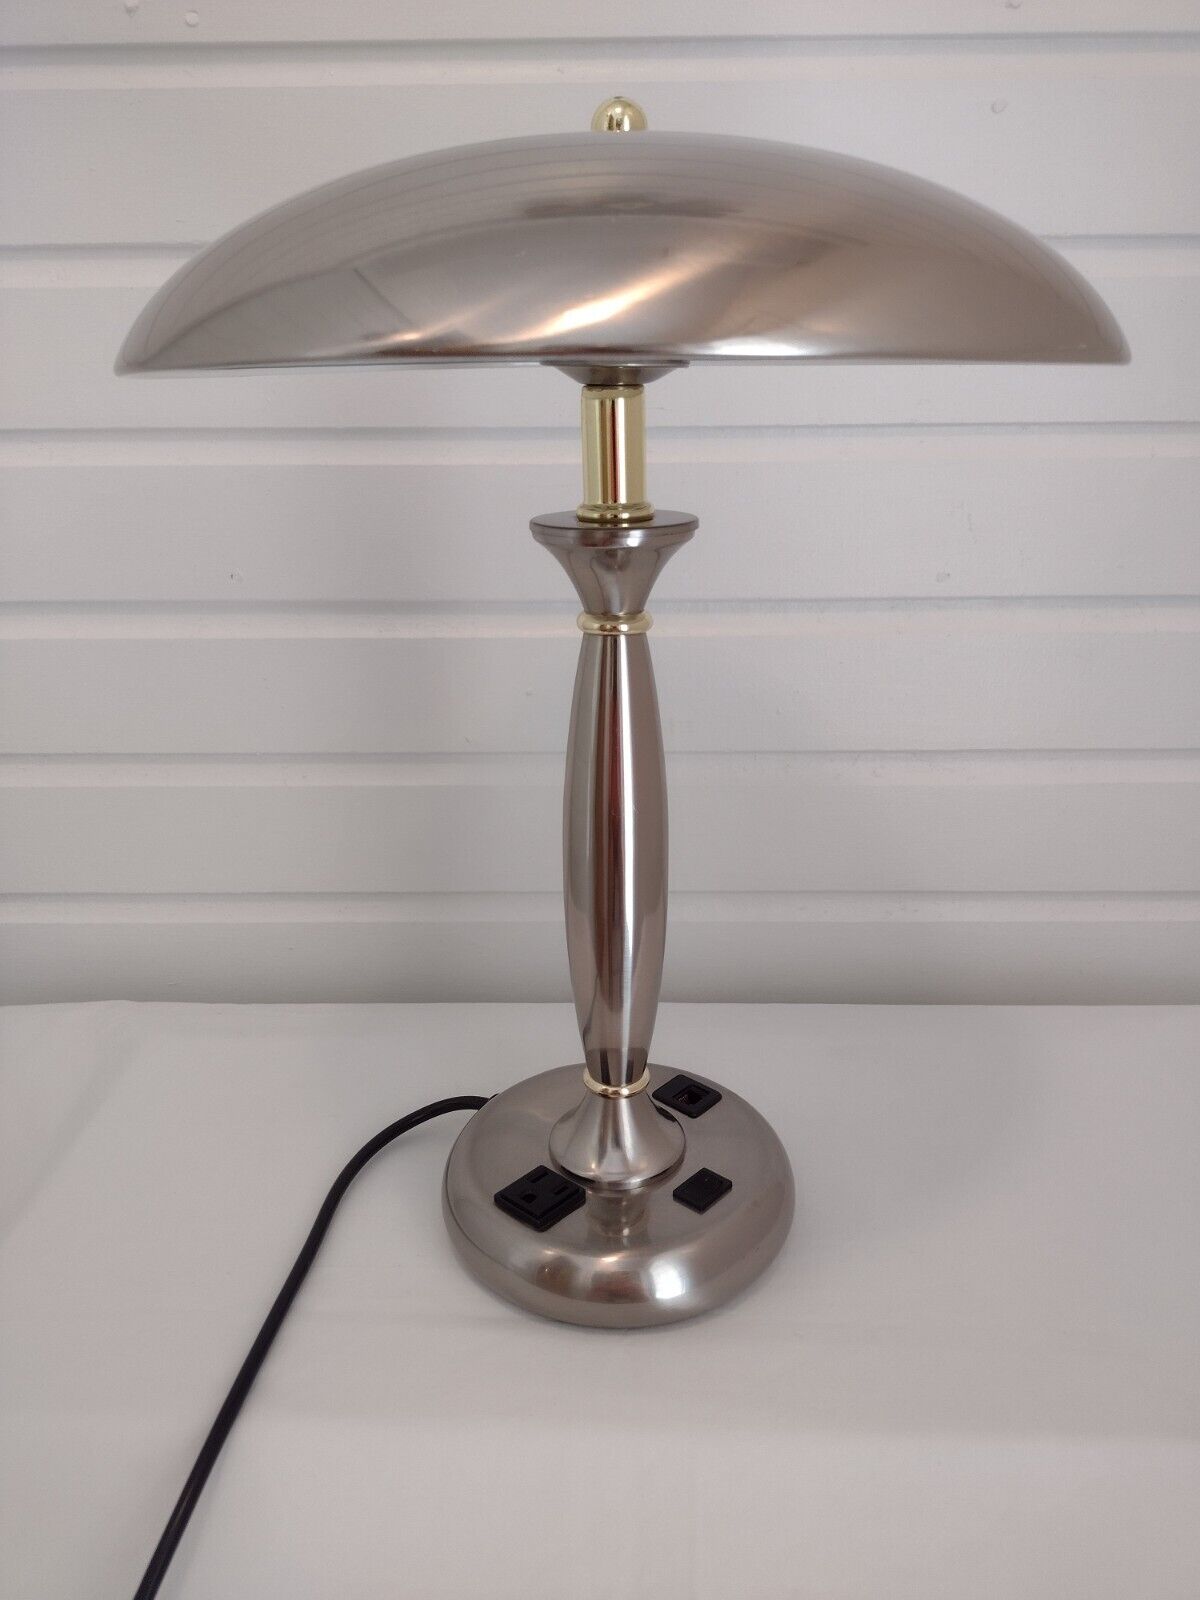 Vintage Chrome Atomic Table Desk Lamp Flying Saucer/UFO Shade Mid Century Style